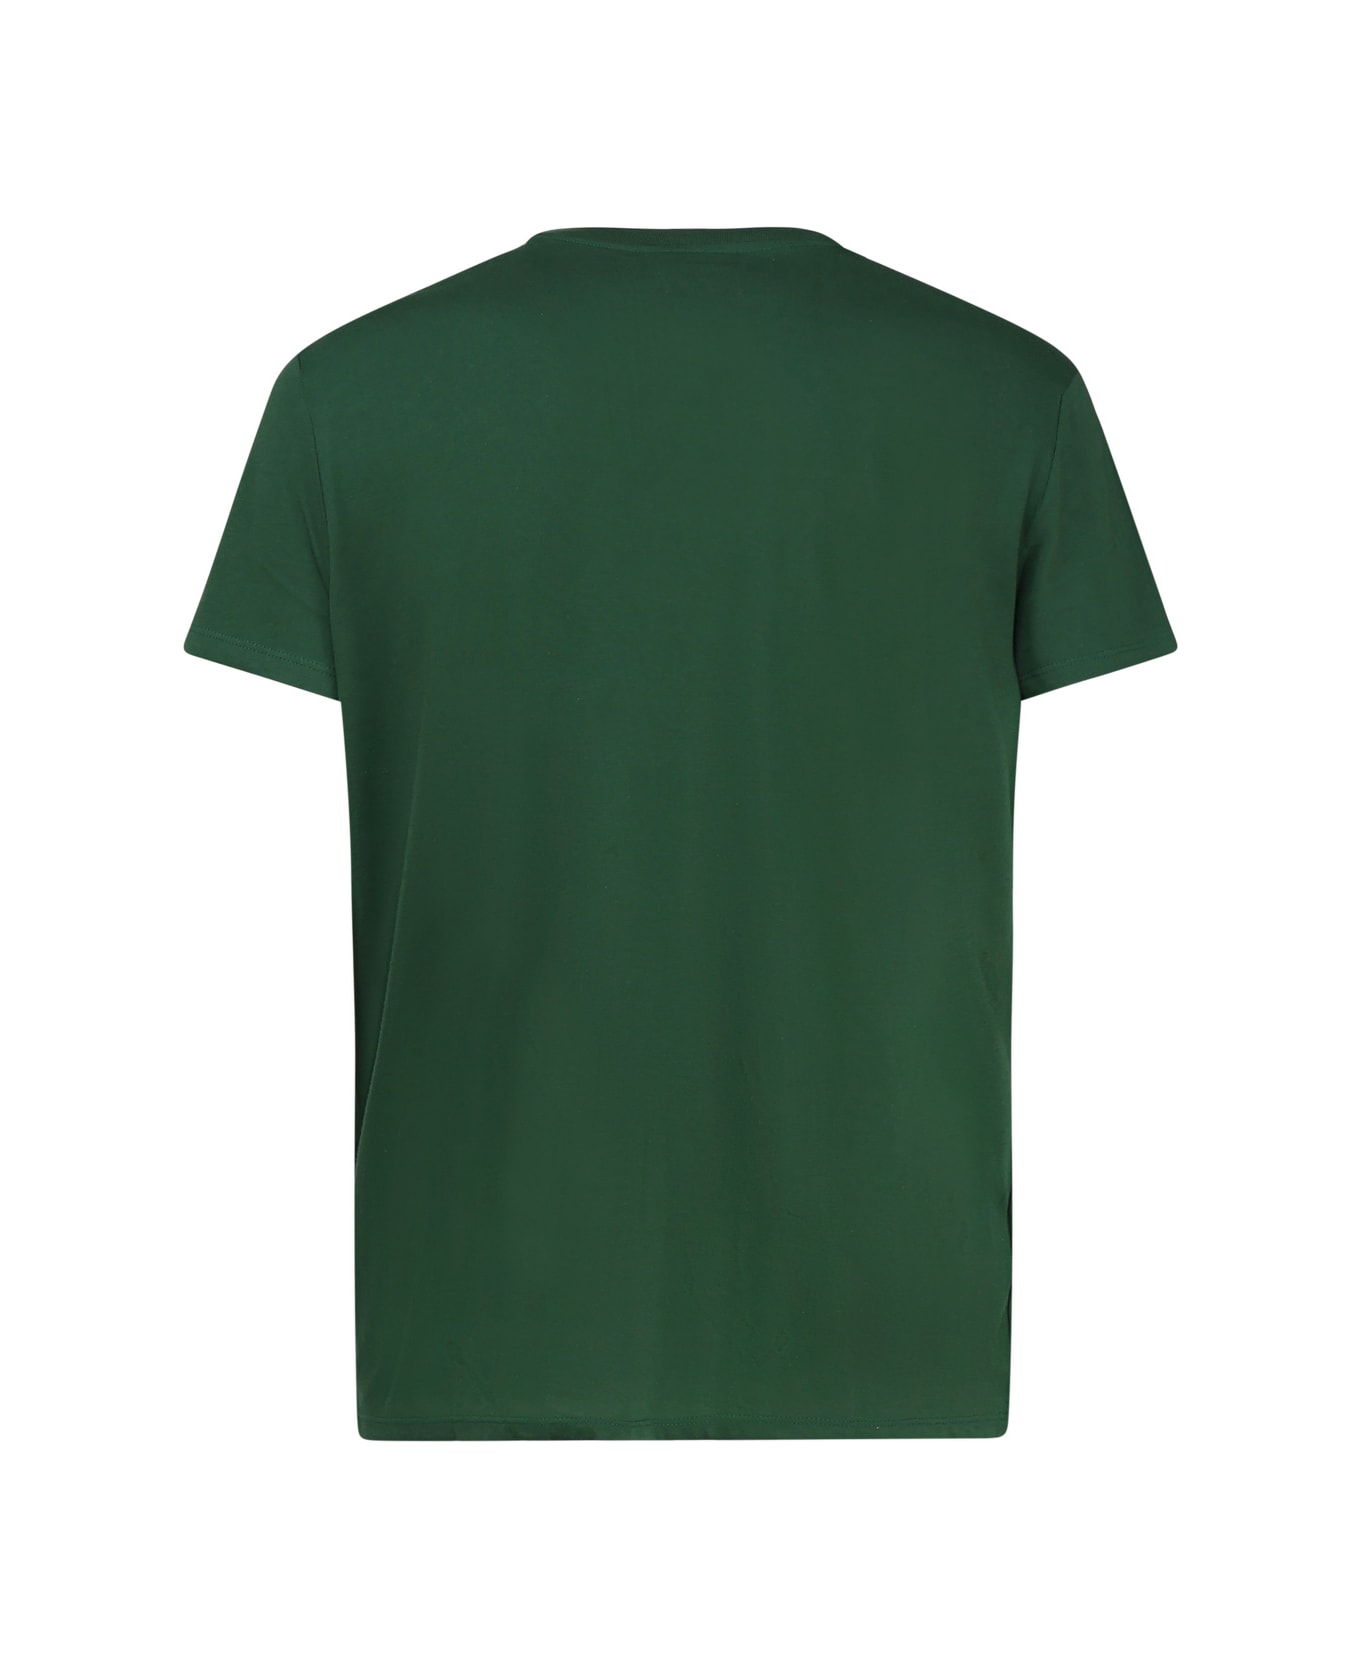 Lacoste Green T-shirt In Cotton Jersey - Green